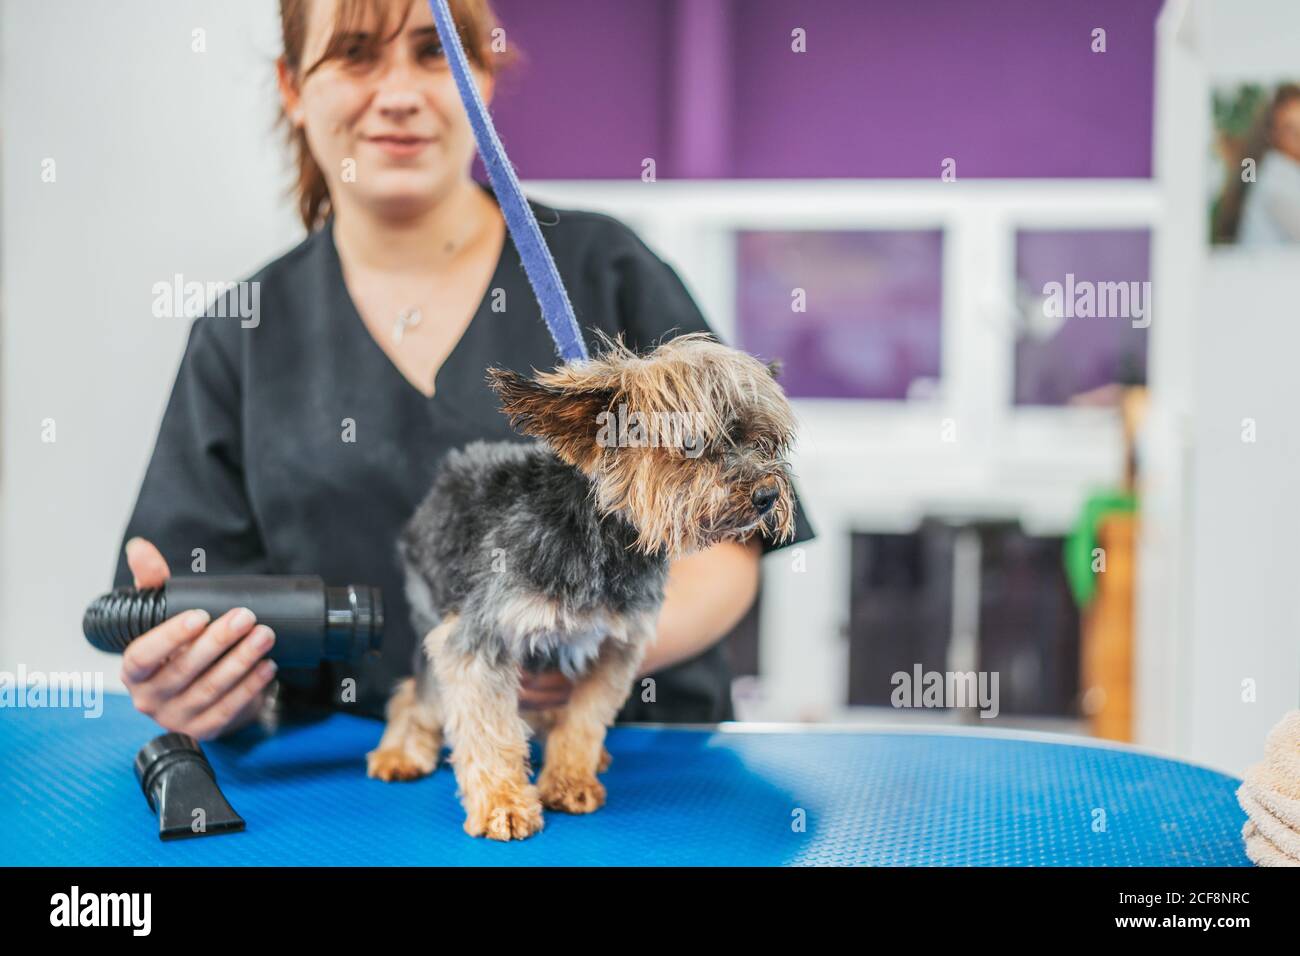 Adorable Yorkshire Terrier sitting on grooming table near blurred Woman drying fur after washing Stock Photo